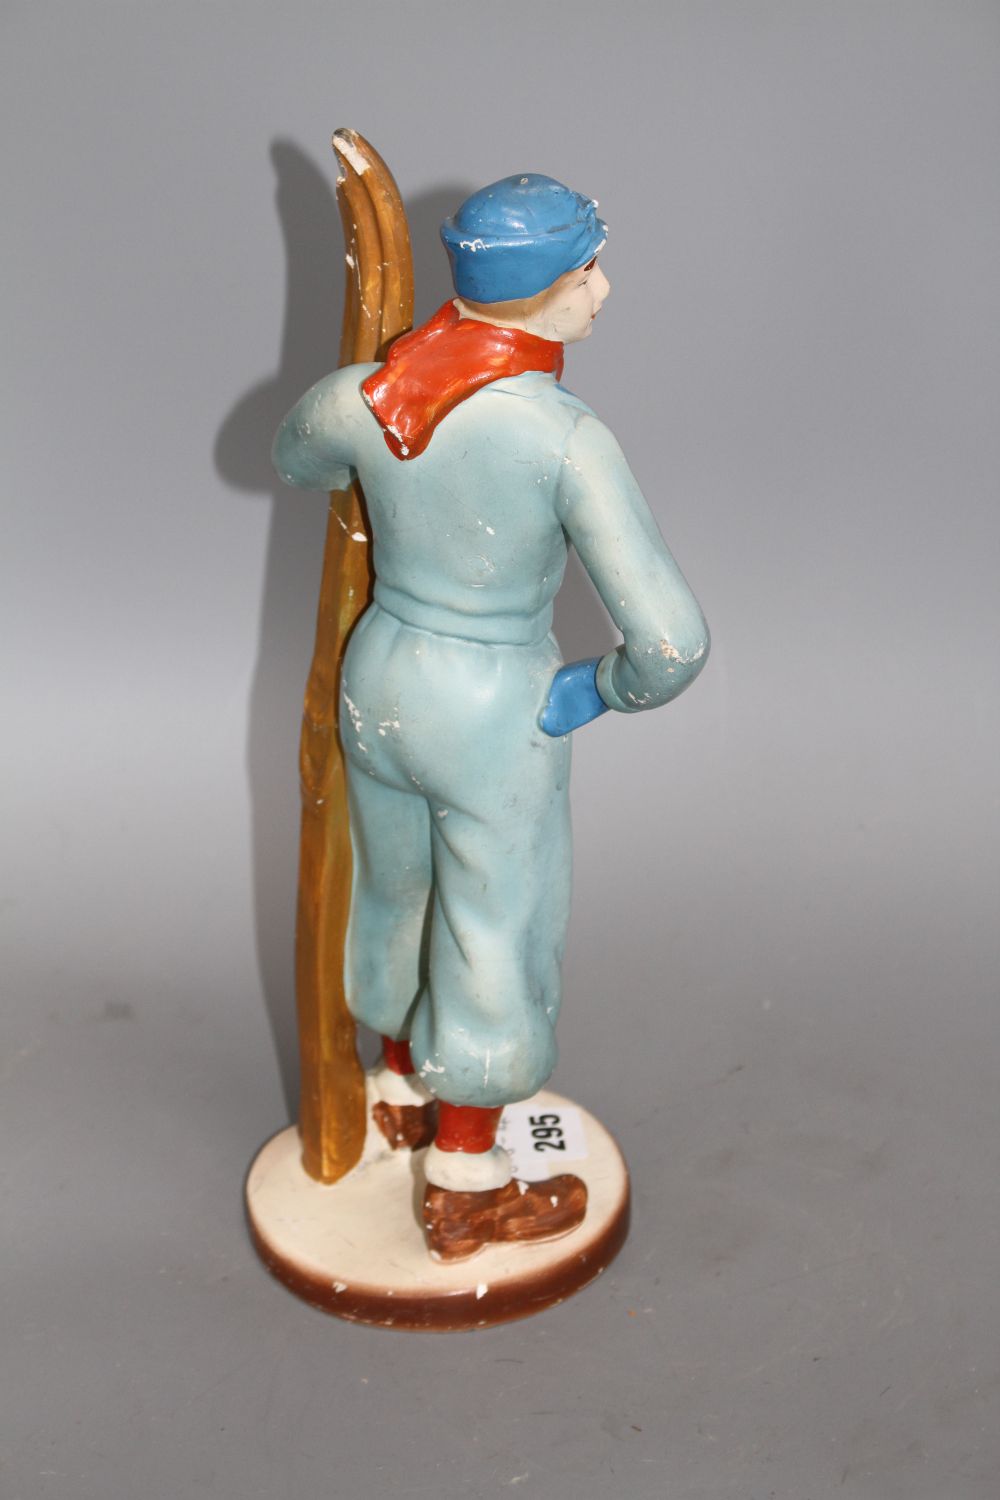 A 1930s painted plaster model of a skier, height 33cm